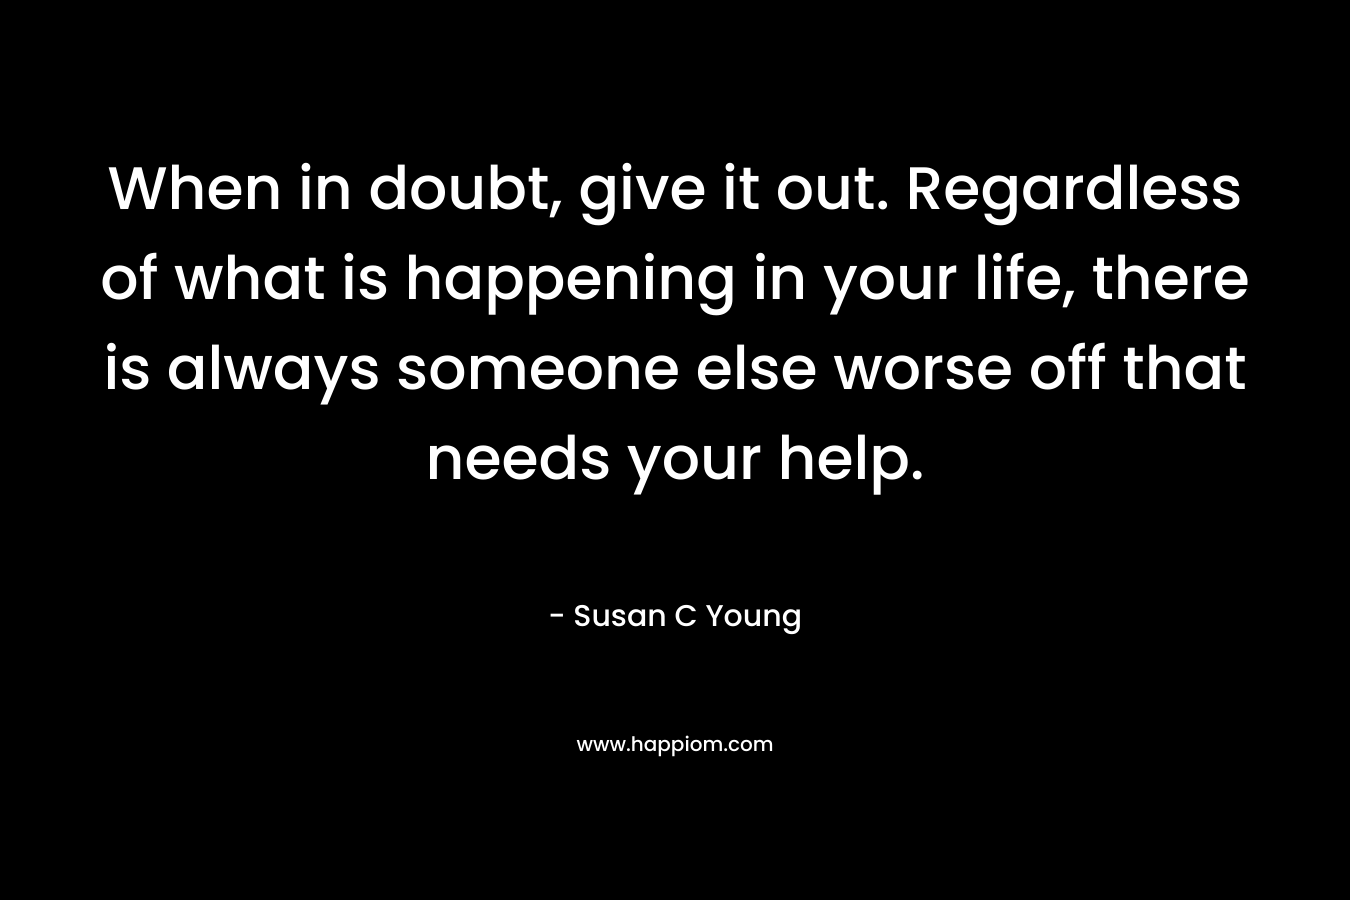 When in doubt, give it out. Regardless of what is happening in your life, there is always someone else worse off that needs your help.